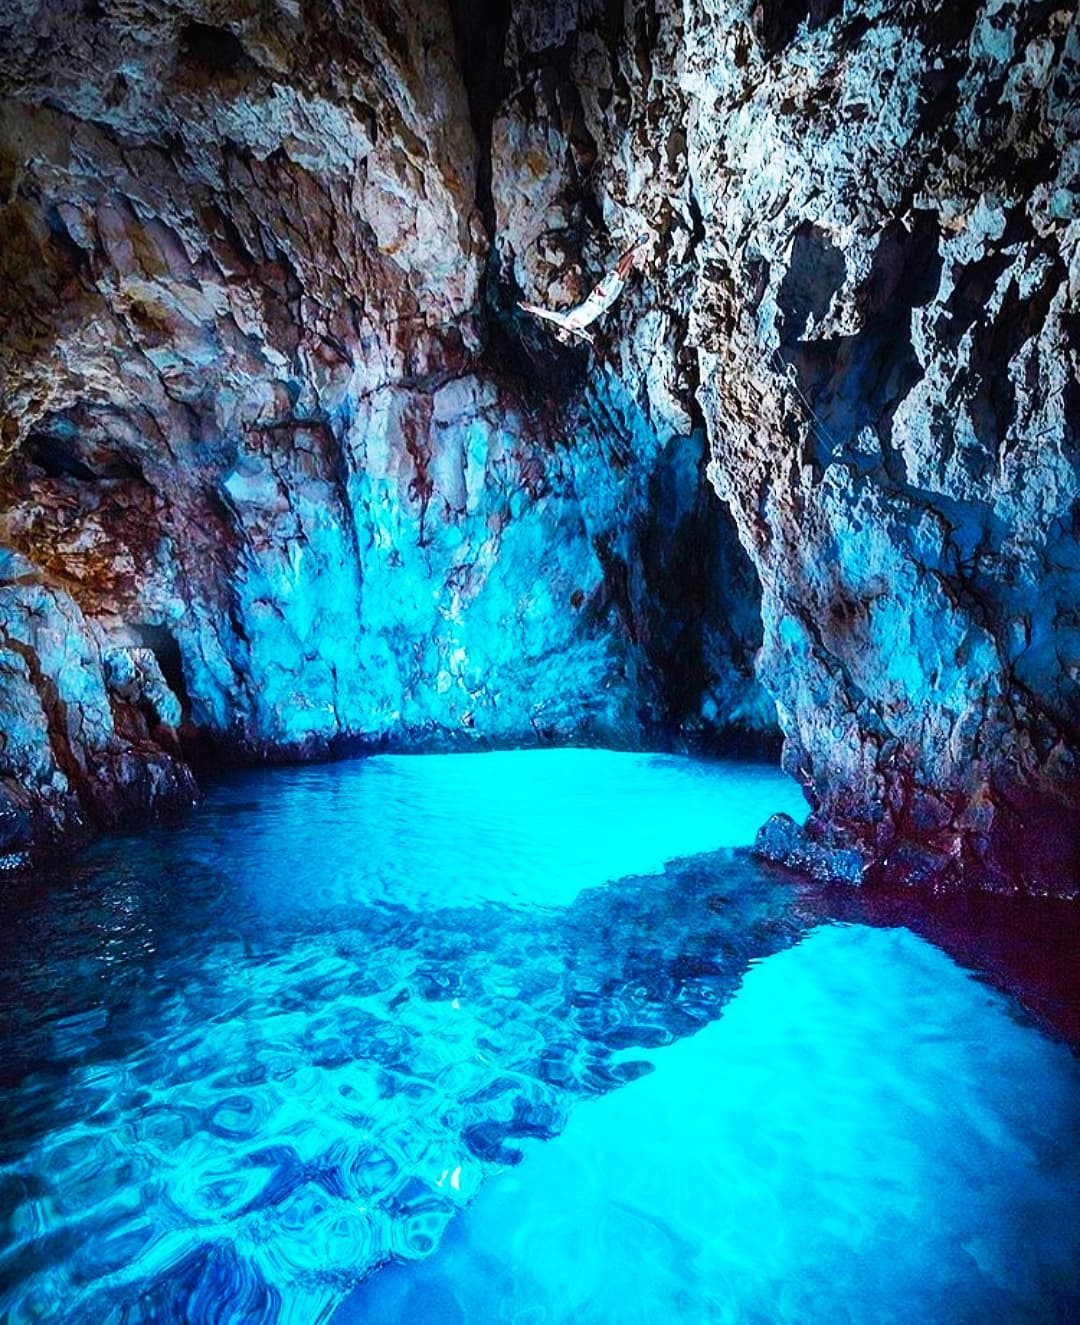 Sandee - Blue Cave Grotto